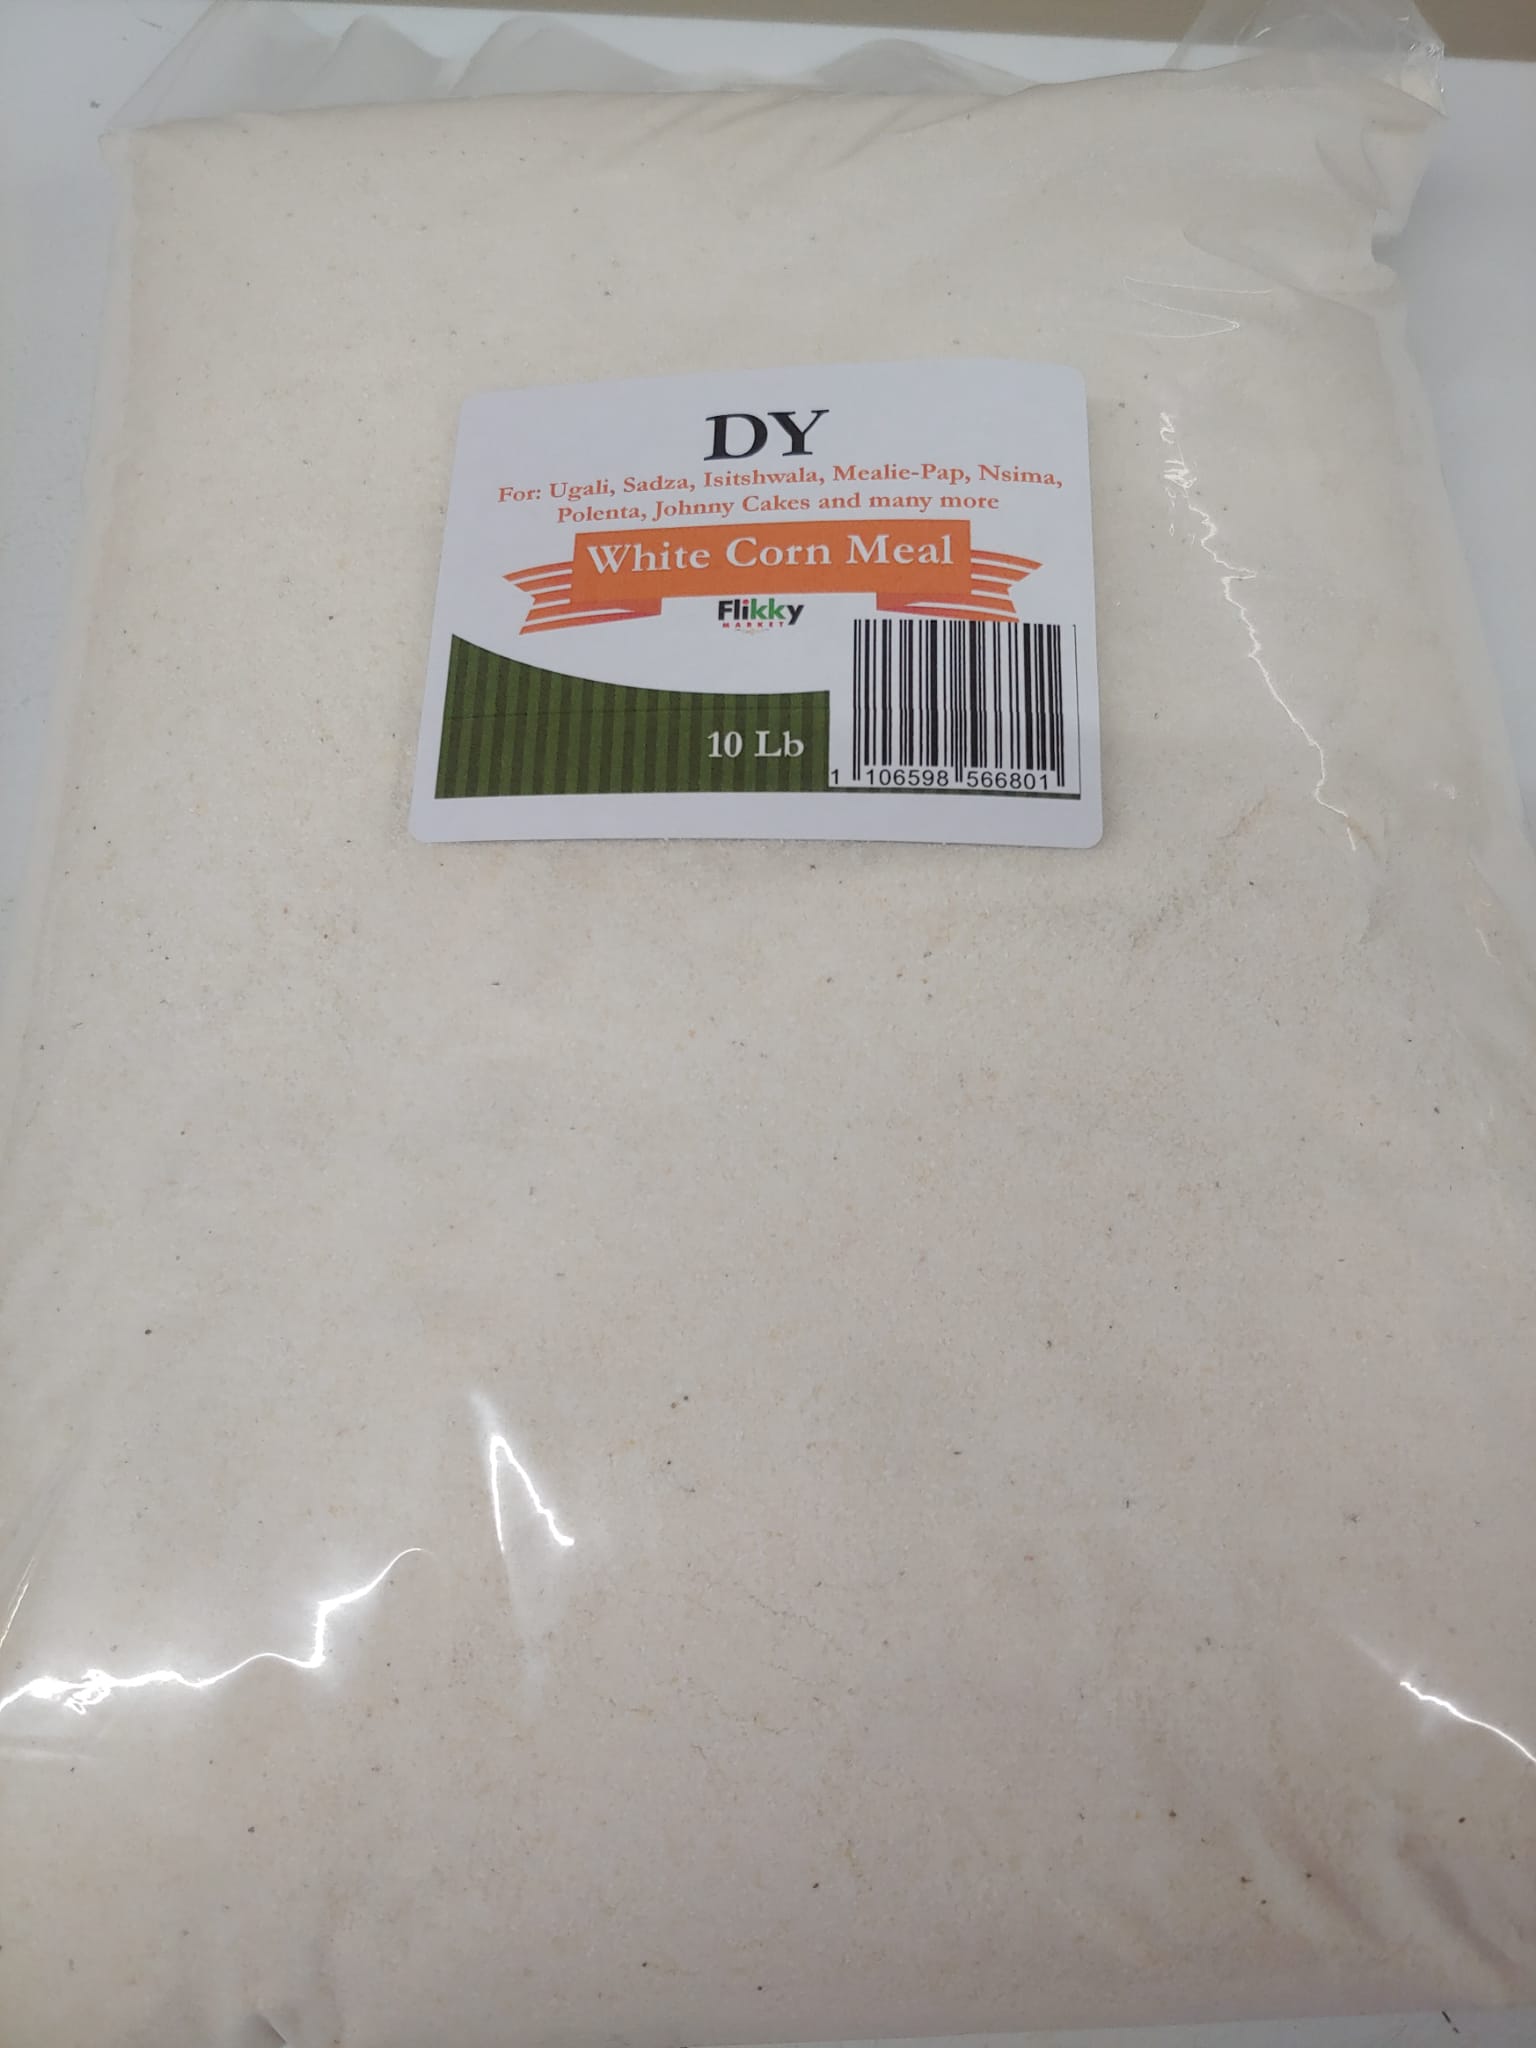 DY White corn meal